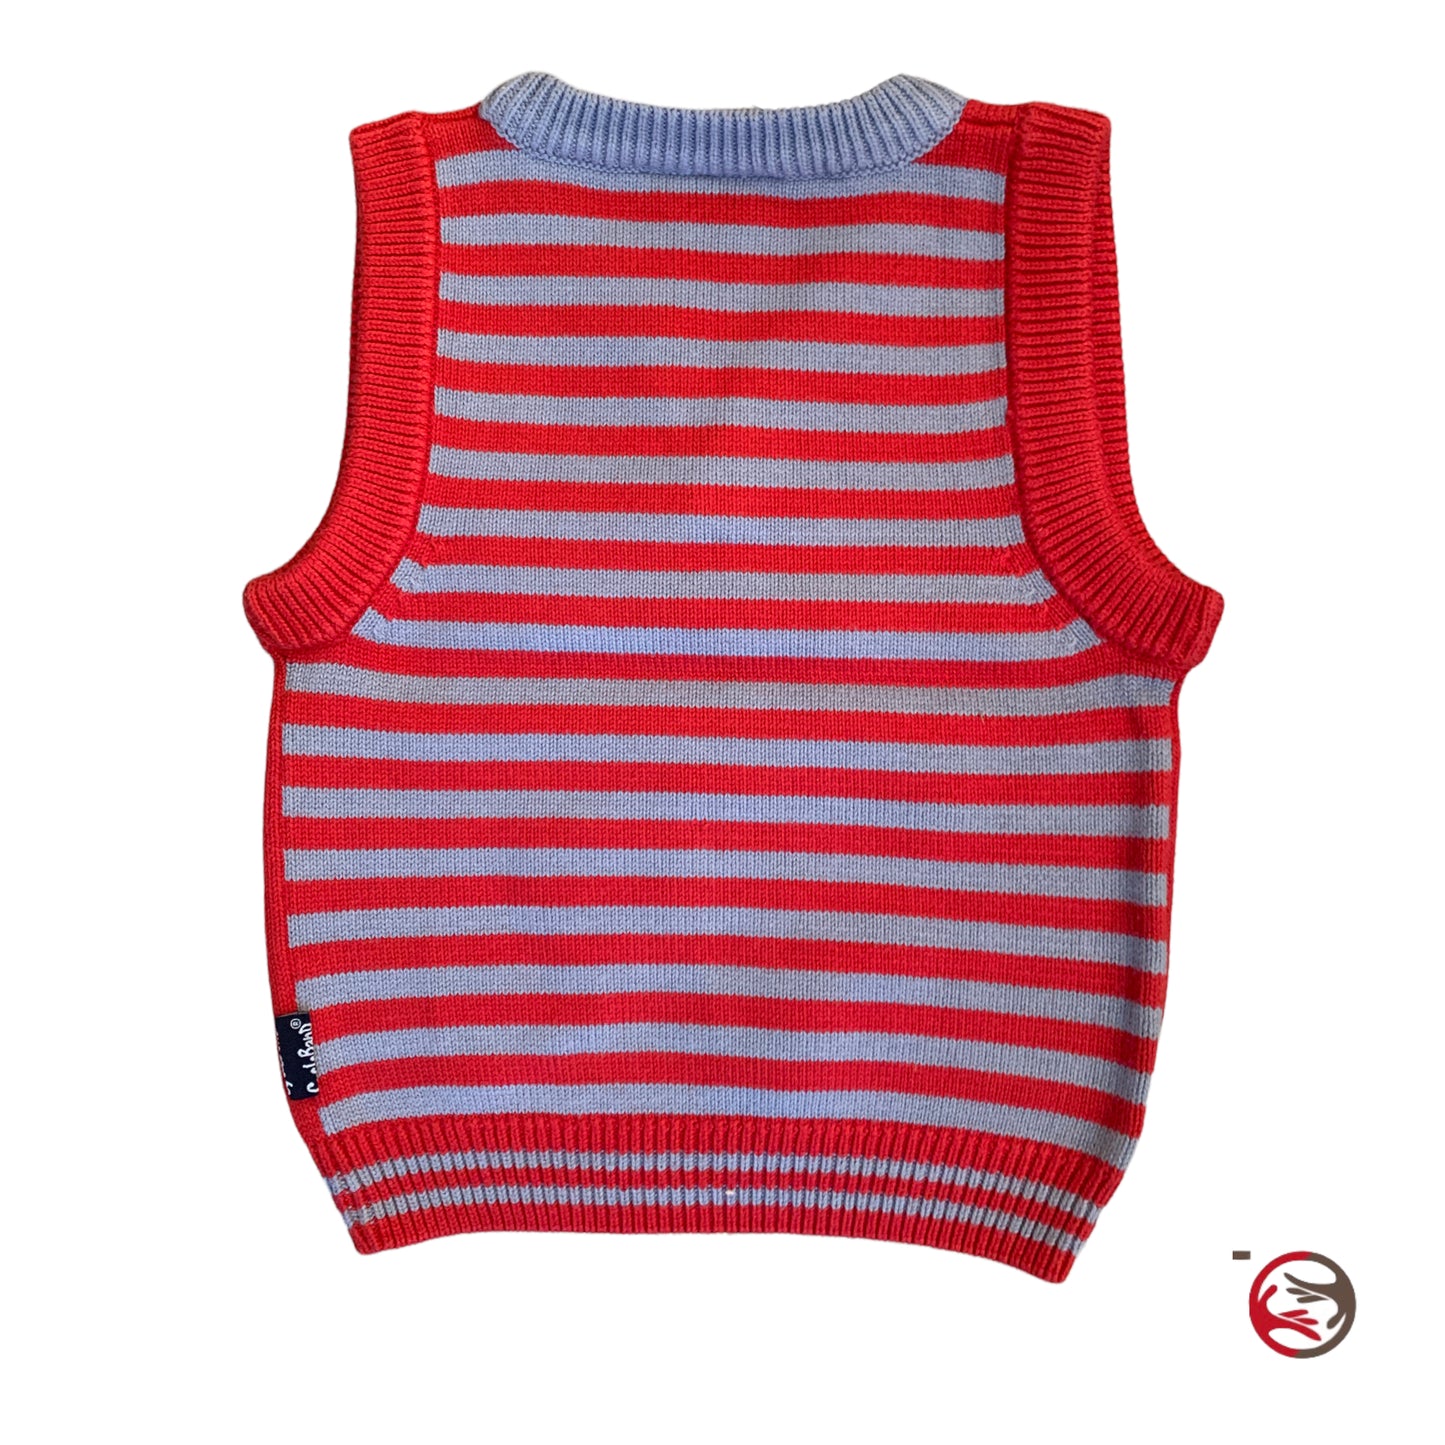 Cycle Band cotton vest for children 18 months